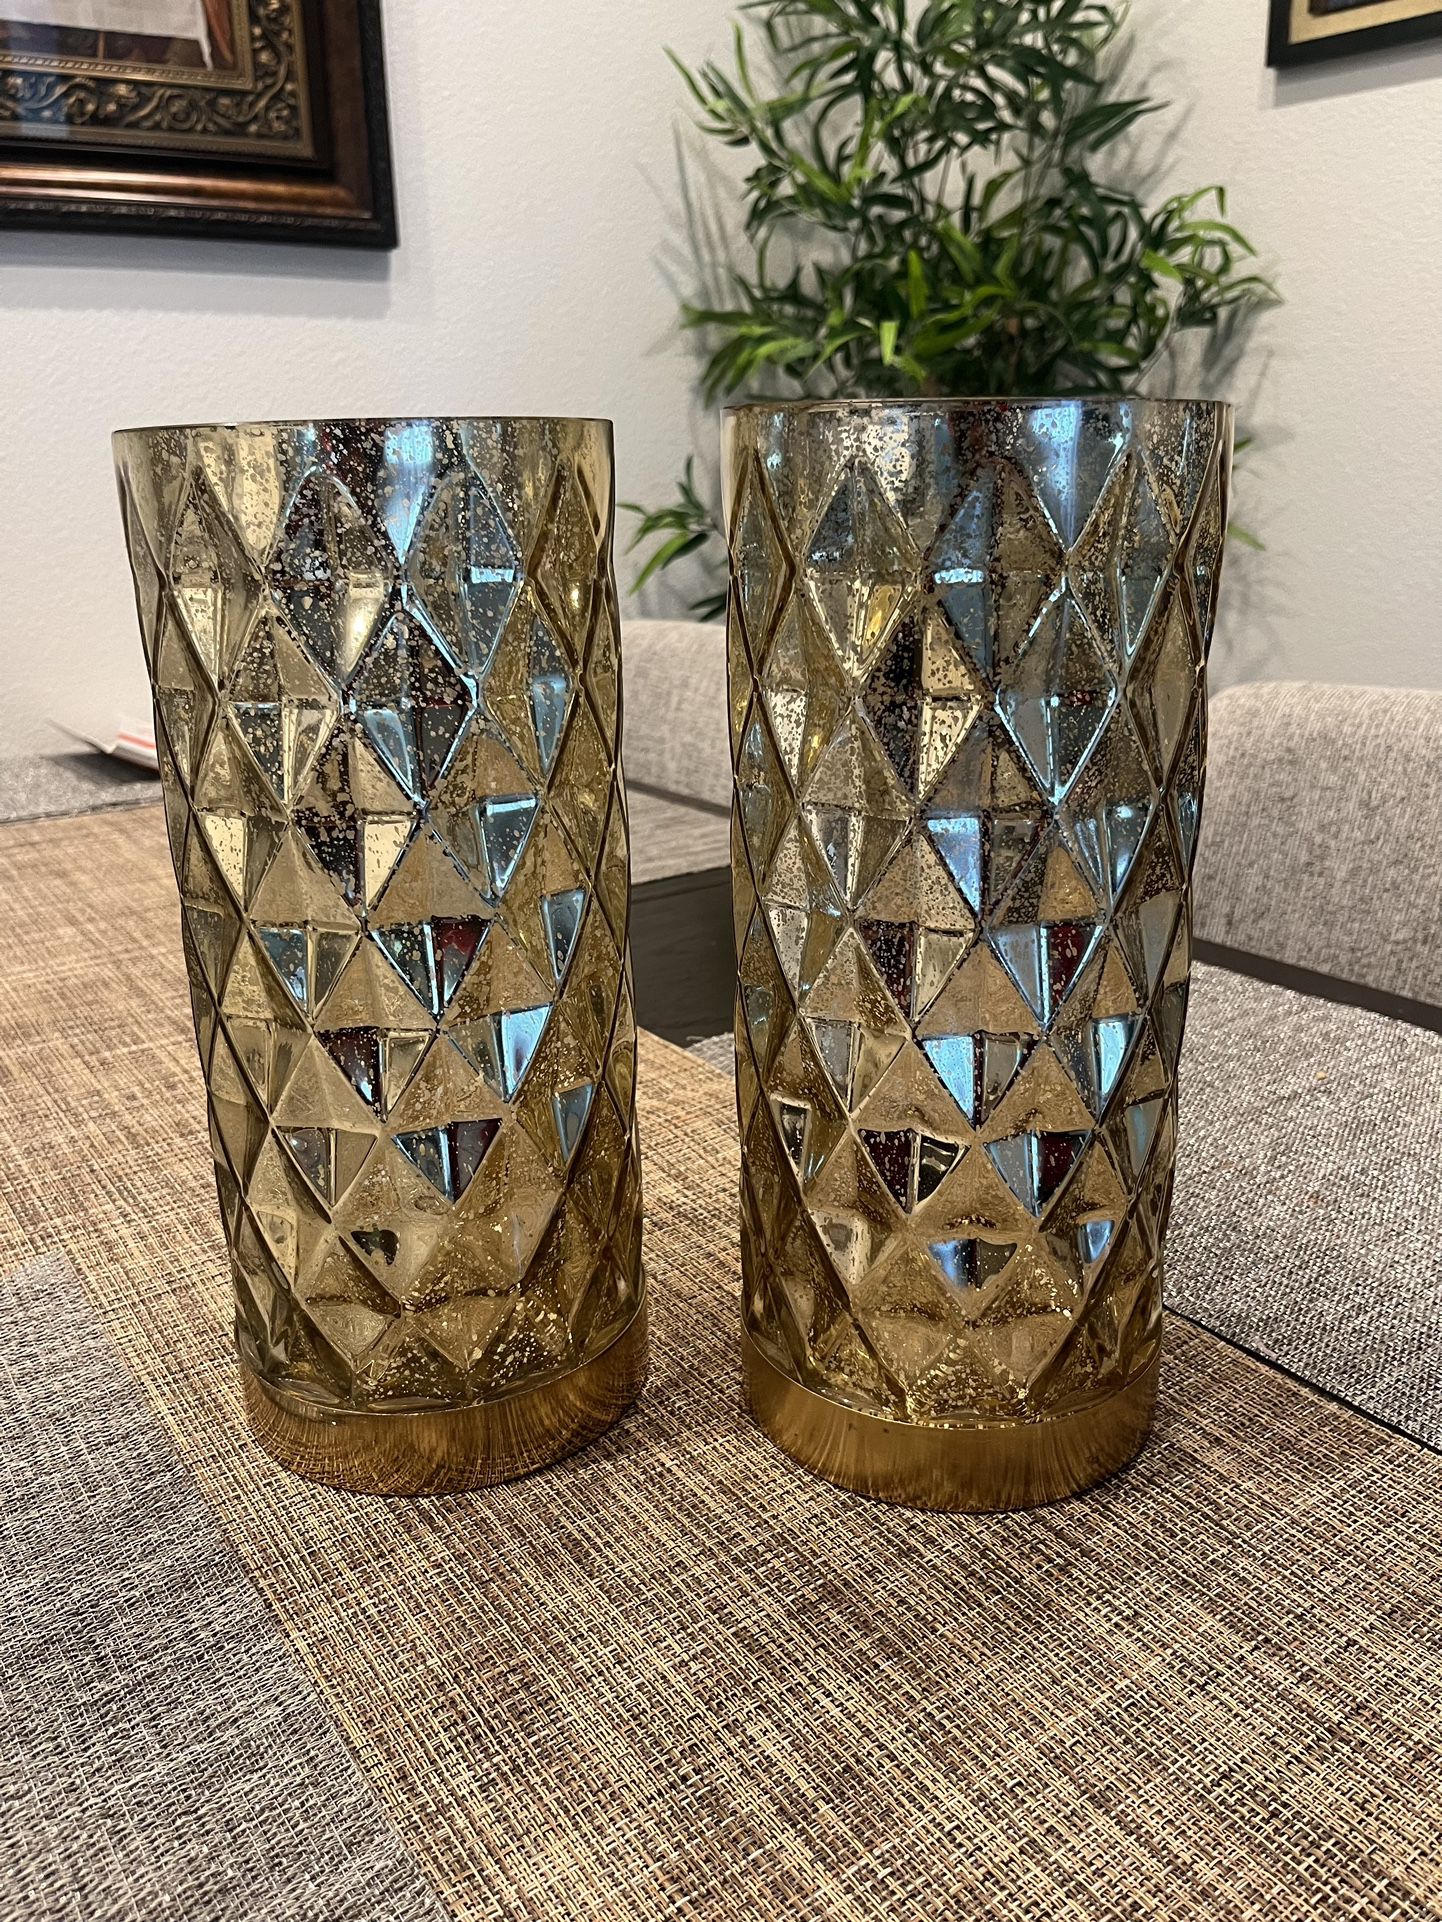 Large Candle Holders / vases